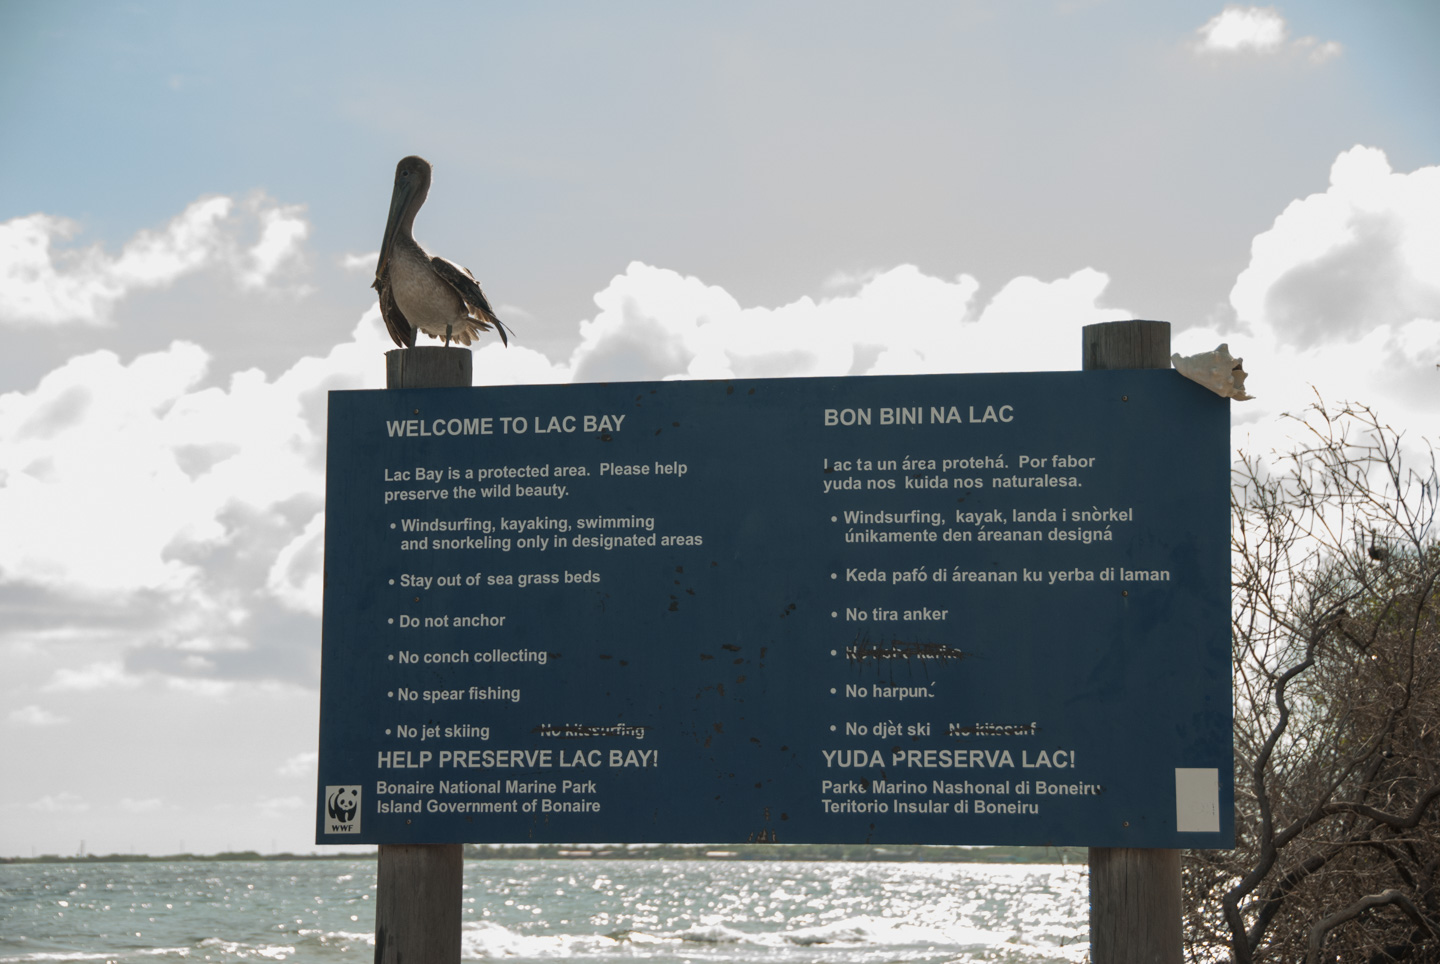 Pelican on Lac Bay sign